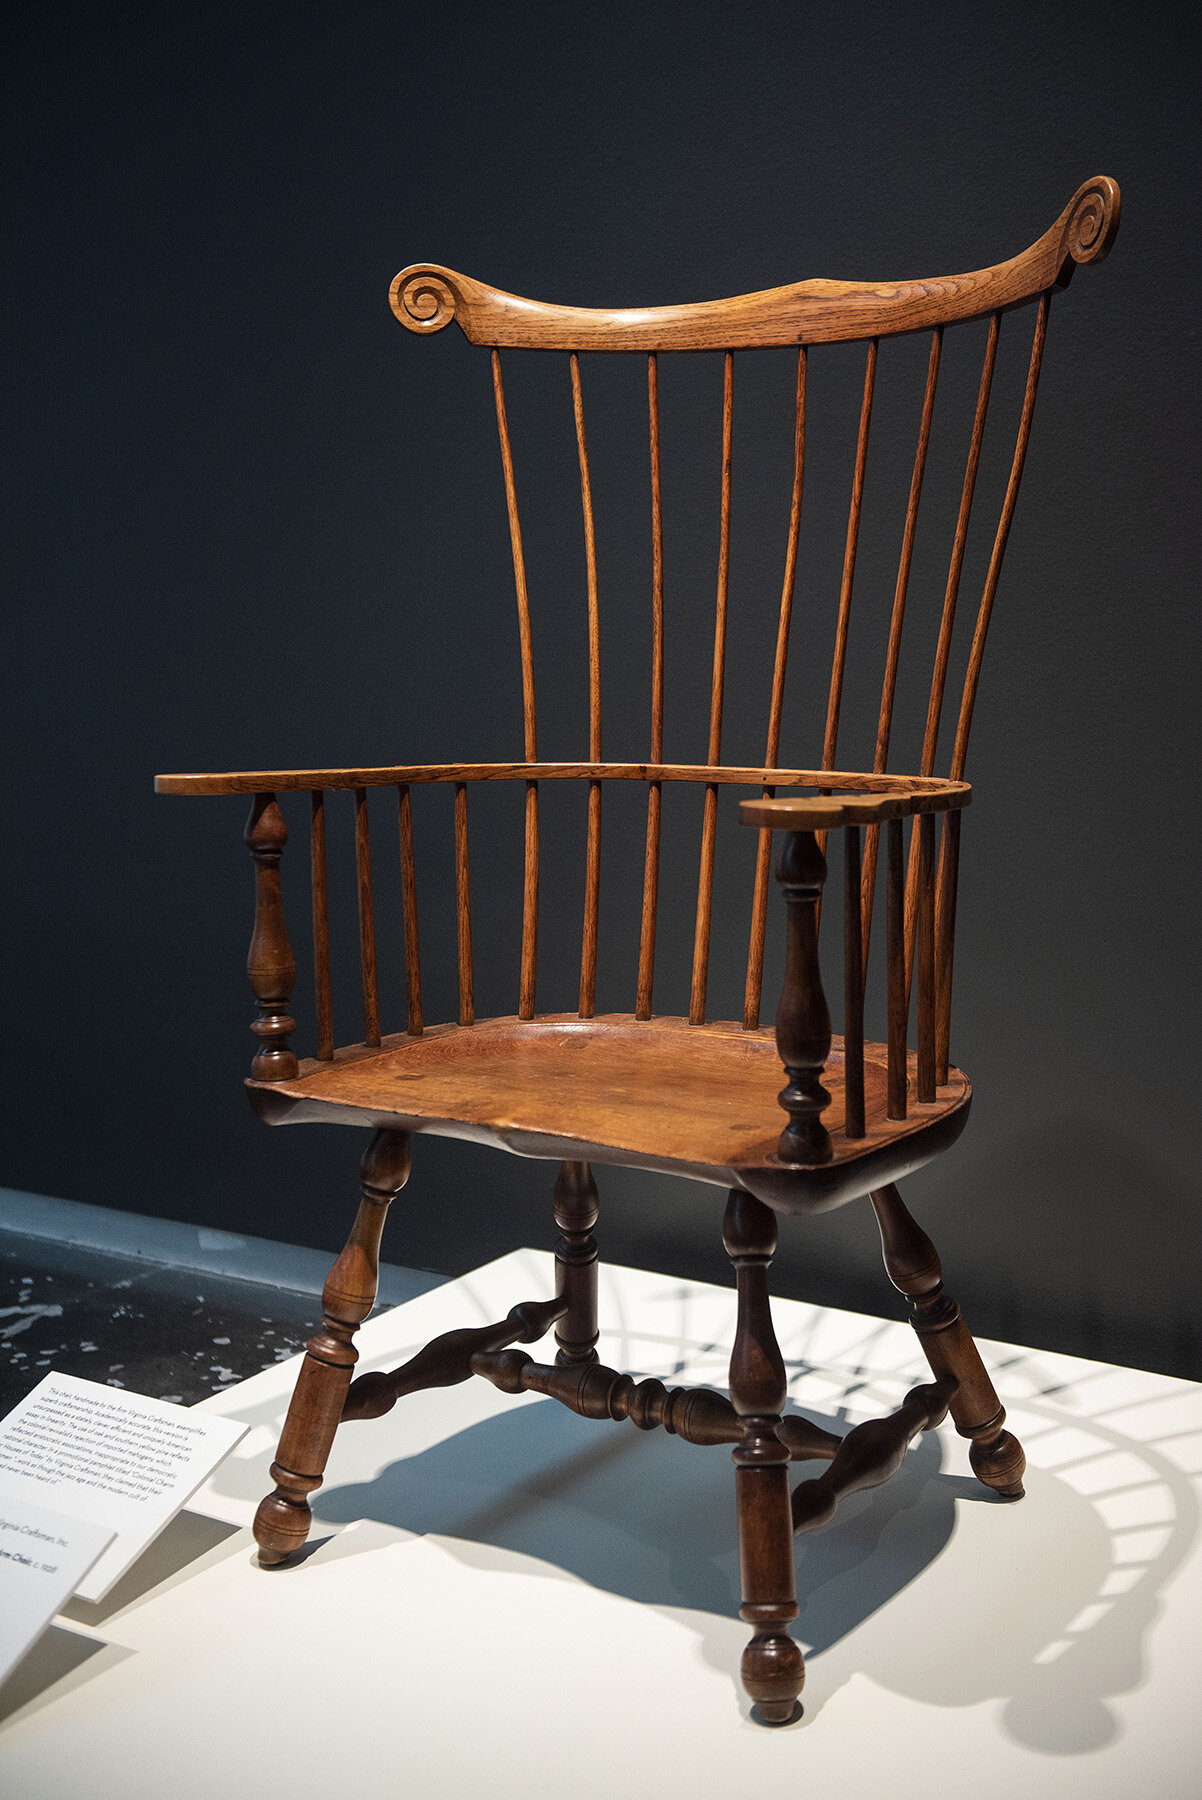  Image from LSU MOA Installation: Manufactured by Virginia Craftsmen, Inc., Harrisonburg, Virgina (Est. 1925),  Colonial Revival Comb-Back Windsor Arm Chair,  c. 1928 